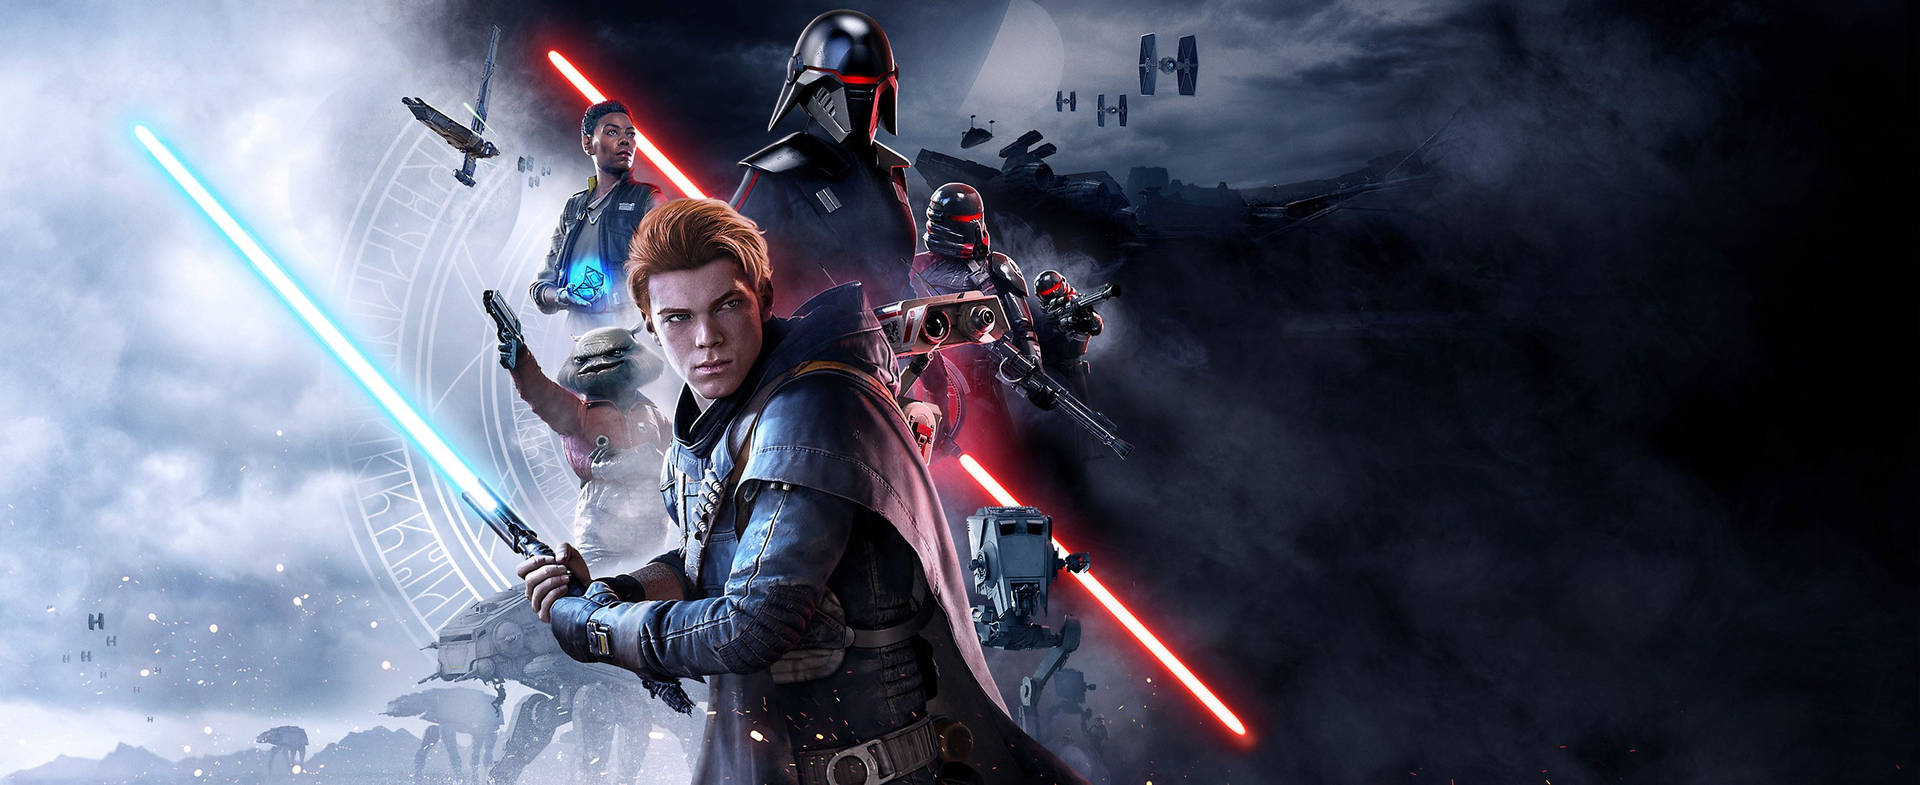 Adventure, danger and the power of the Force await in Star Wars Jedi: Fallen Order Wallpaper